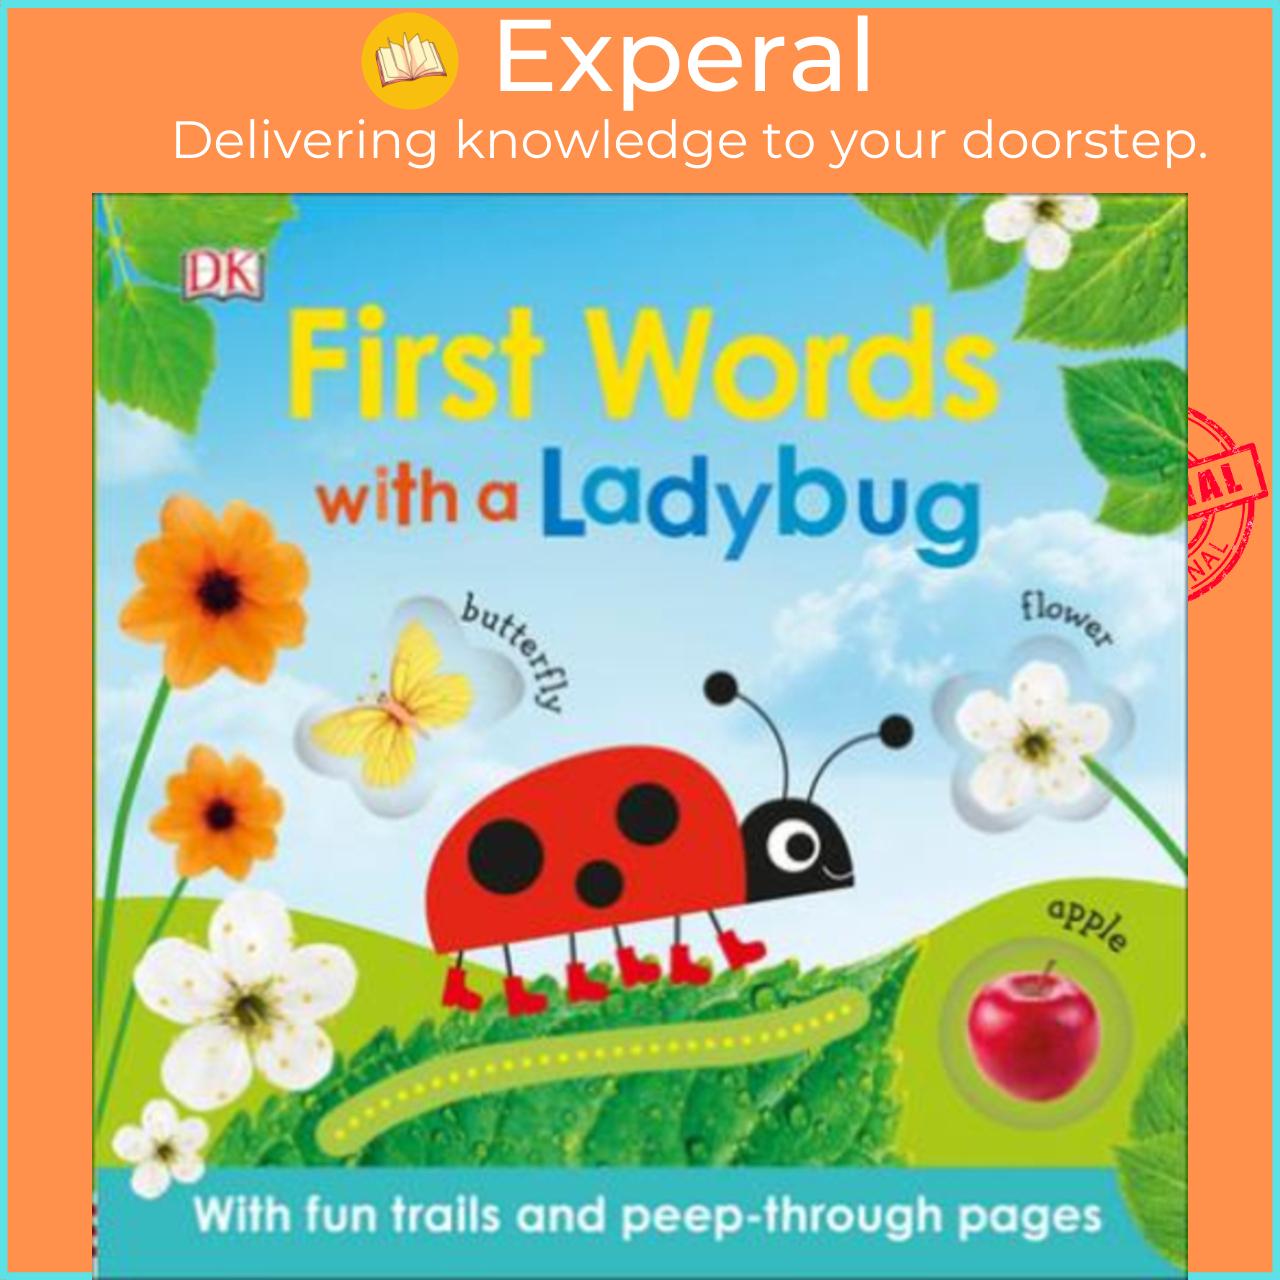 Sách - First Words with a Ladybug by DK (US edition, paperback)